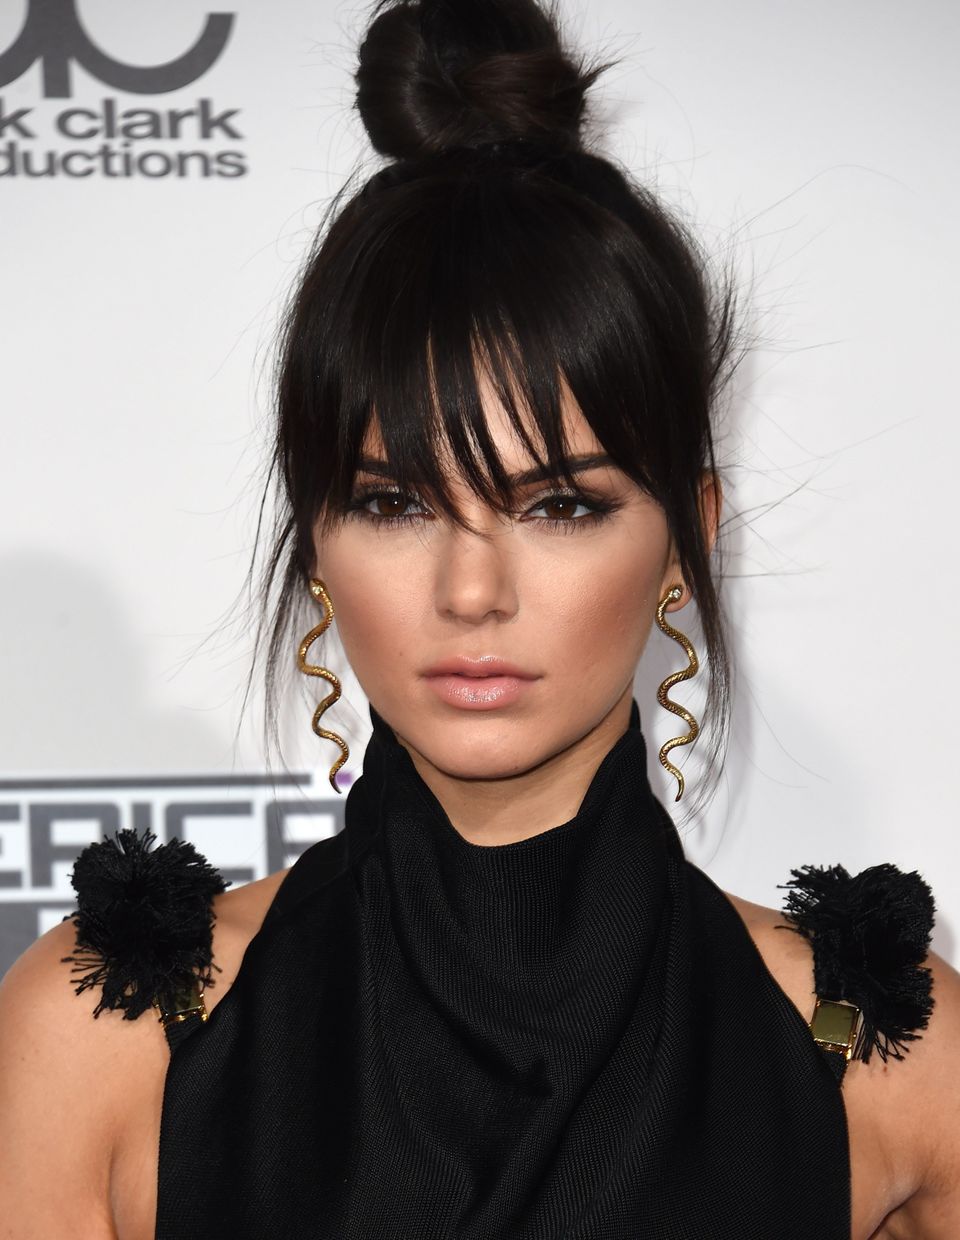 A Top-Knot with Razored-Bangs